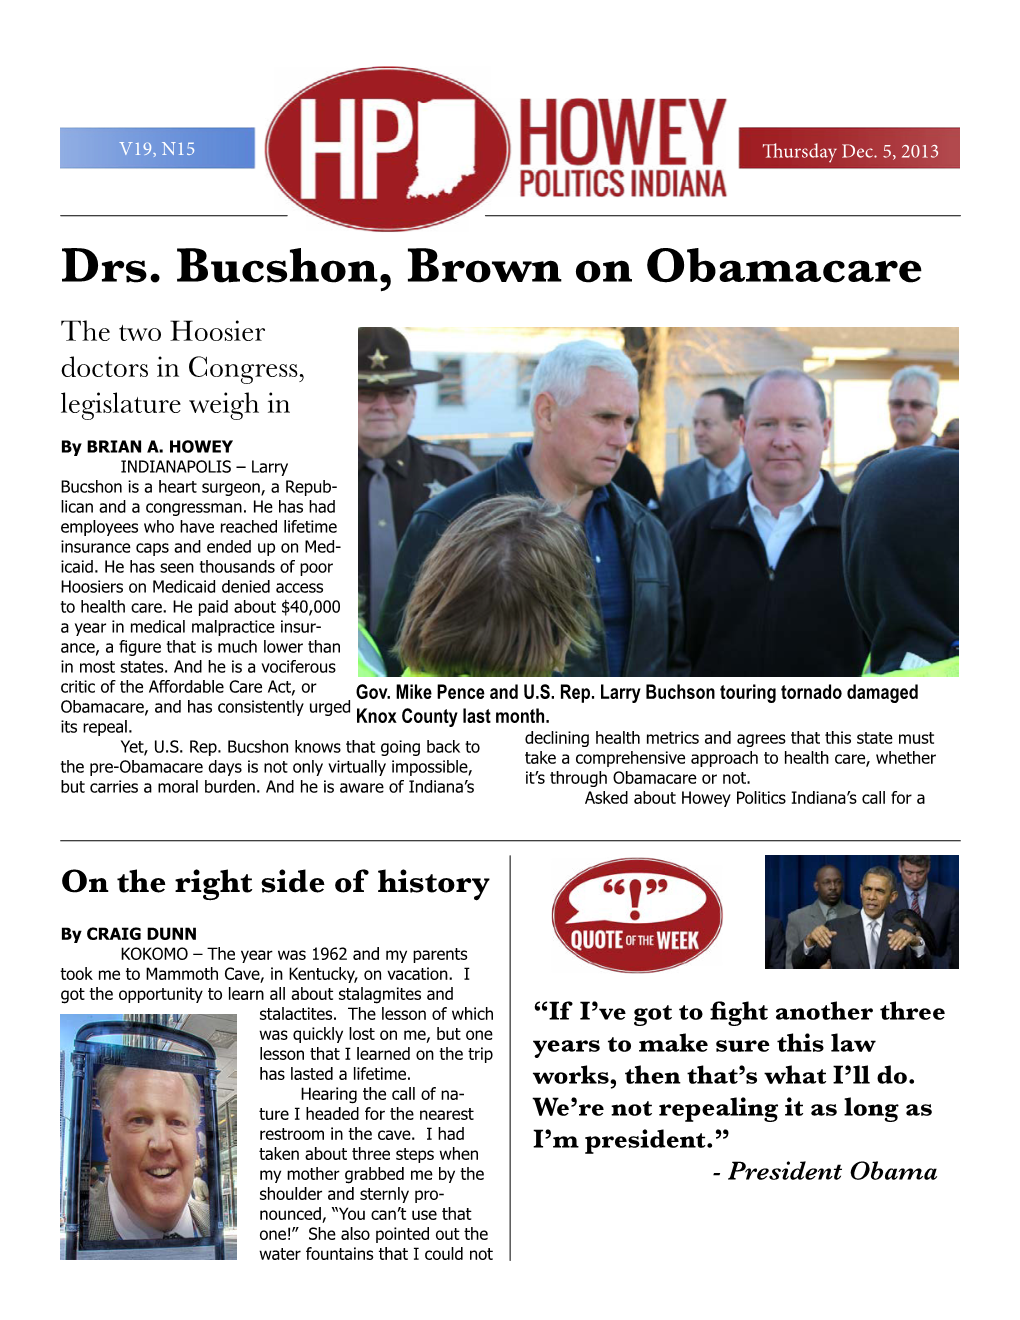 Drs. Bucshon, Brown on Obamacare the Two Hoosier Doctors in Congress, Legislature Weigh In